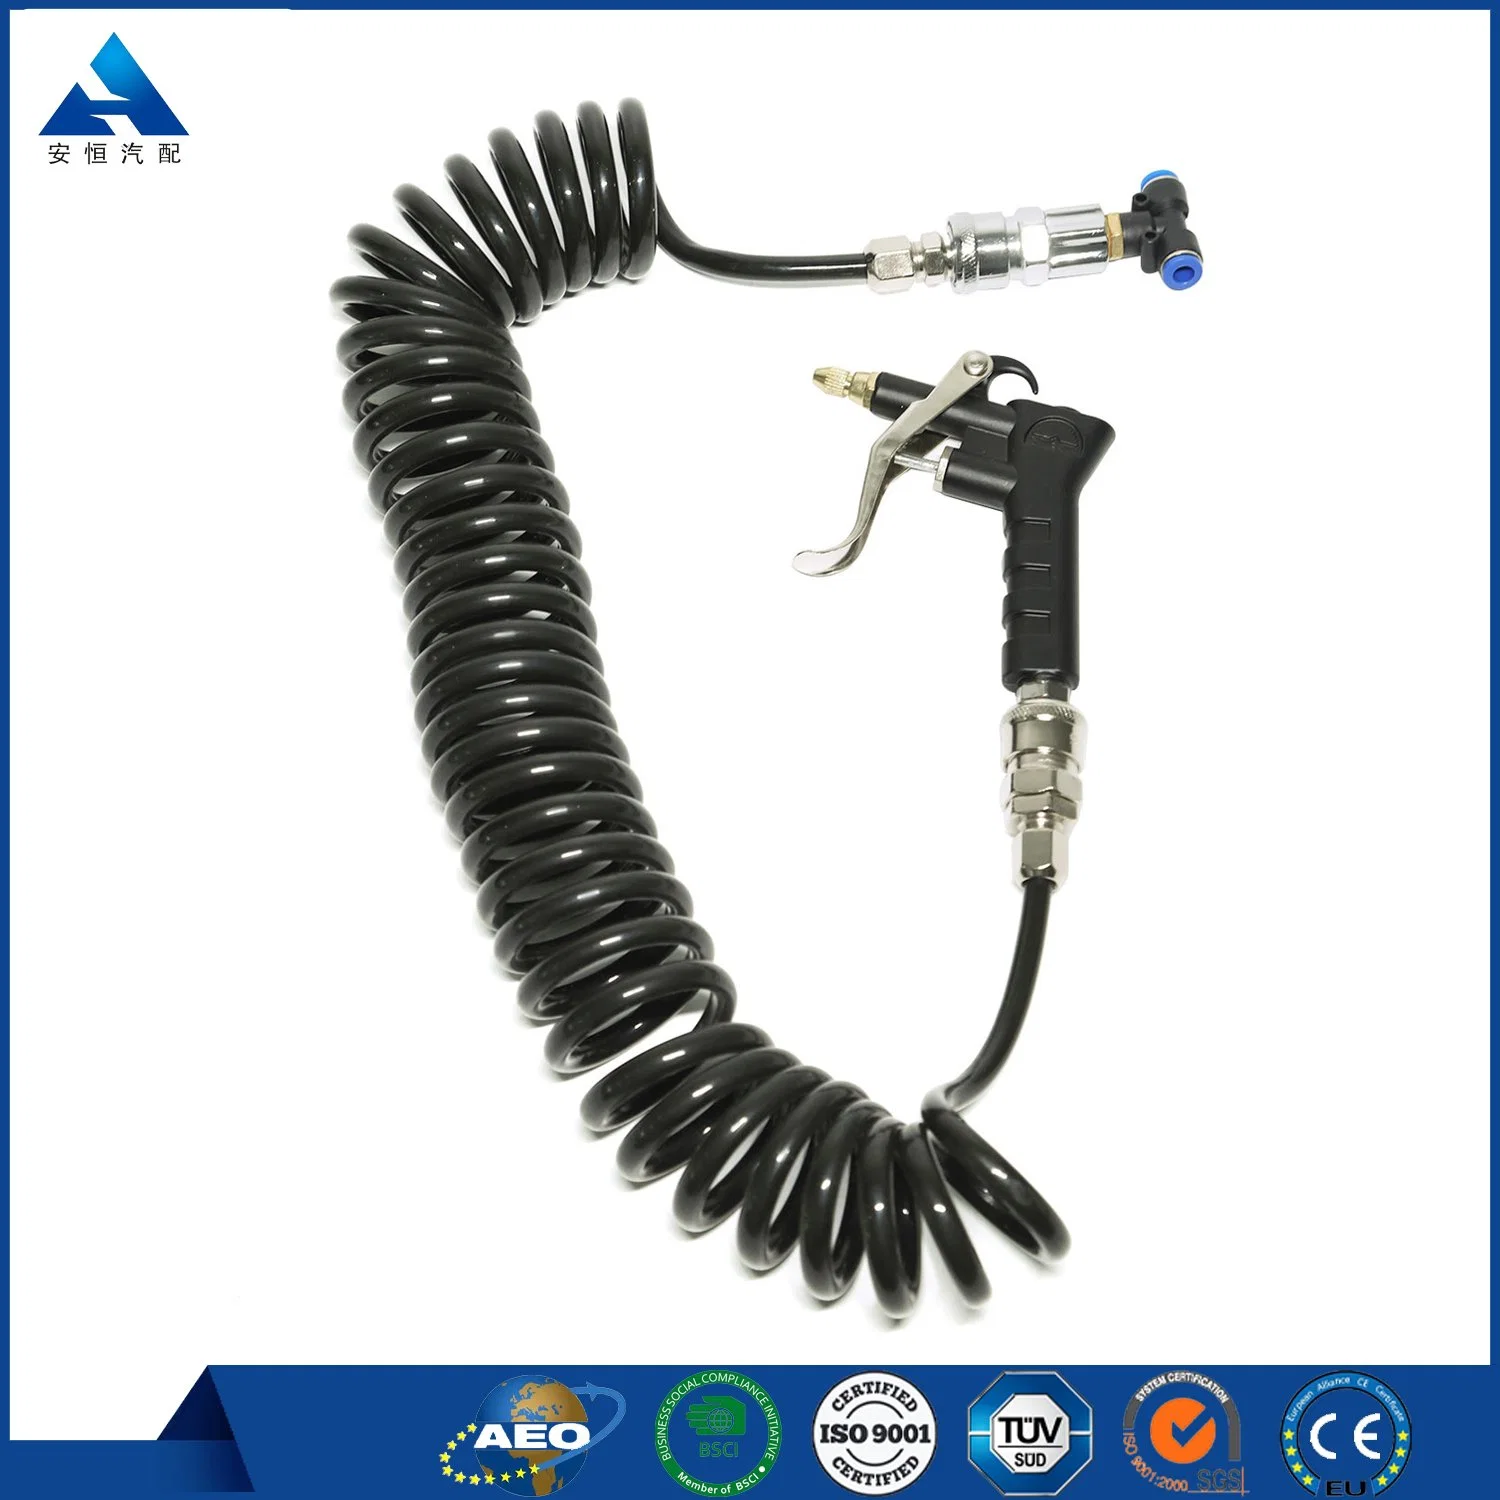 Professional Pneumatic Tools Nozzle Air Blow Dust Cleaning Gun for Air Compressor Sale Well